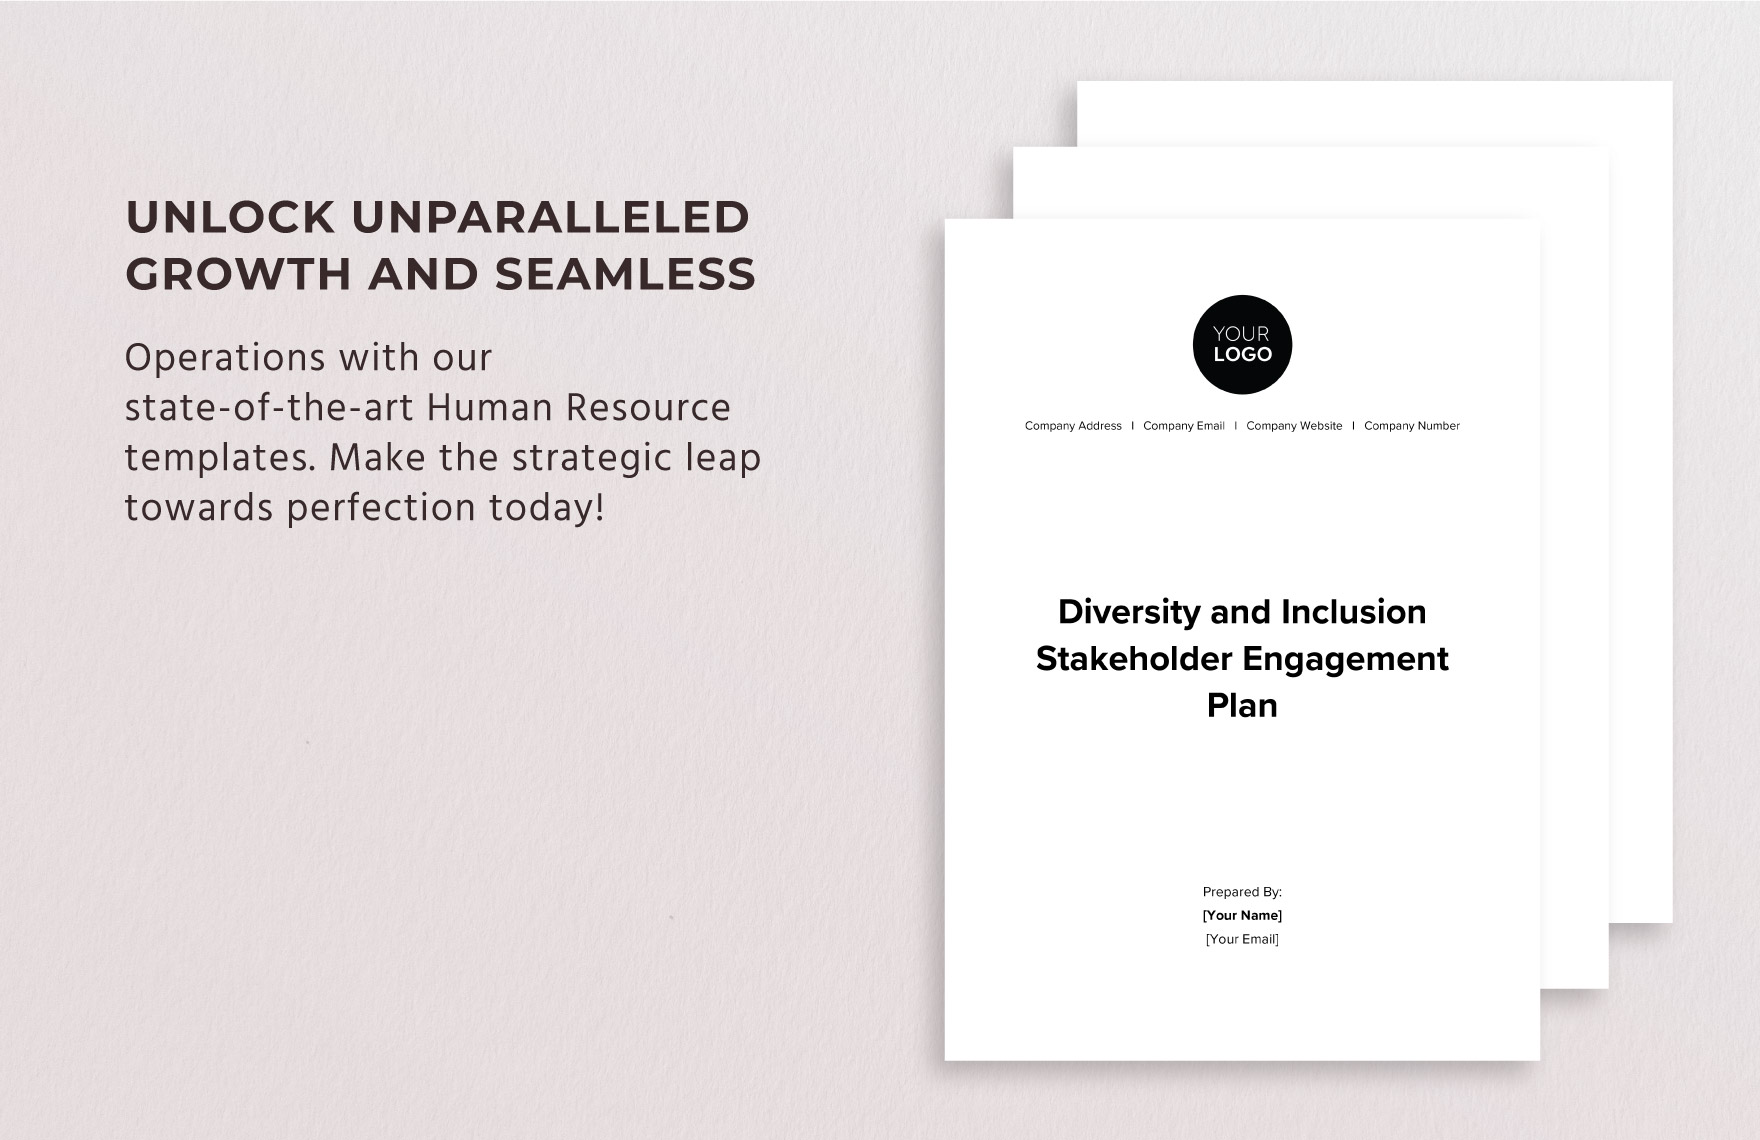 Diversity and Inclusion Stakeholder Engagement Plan HR Template